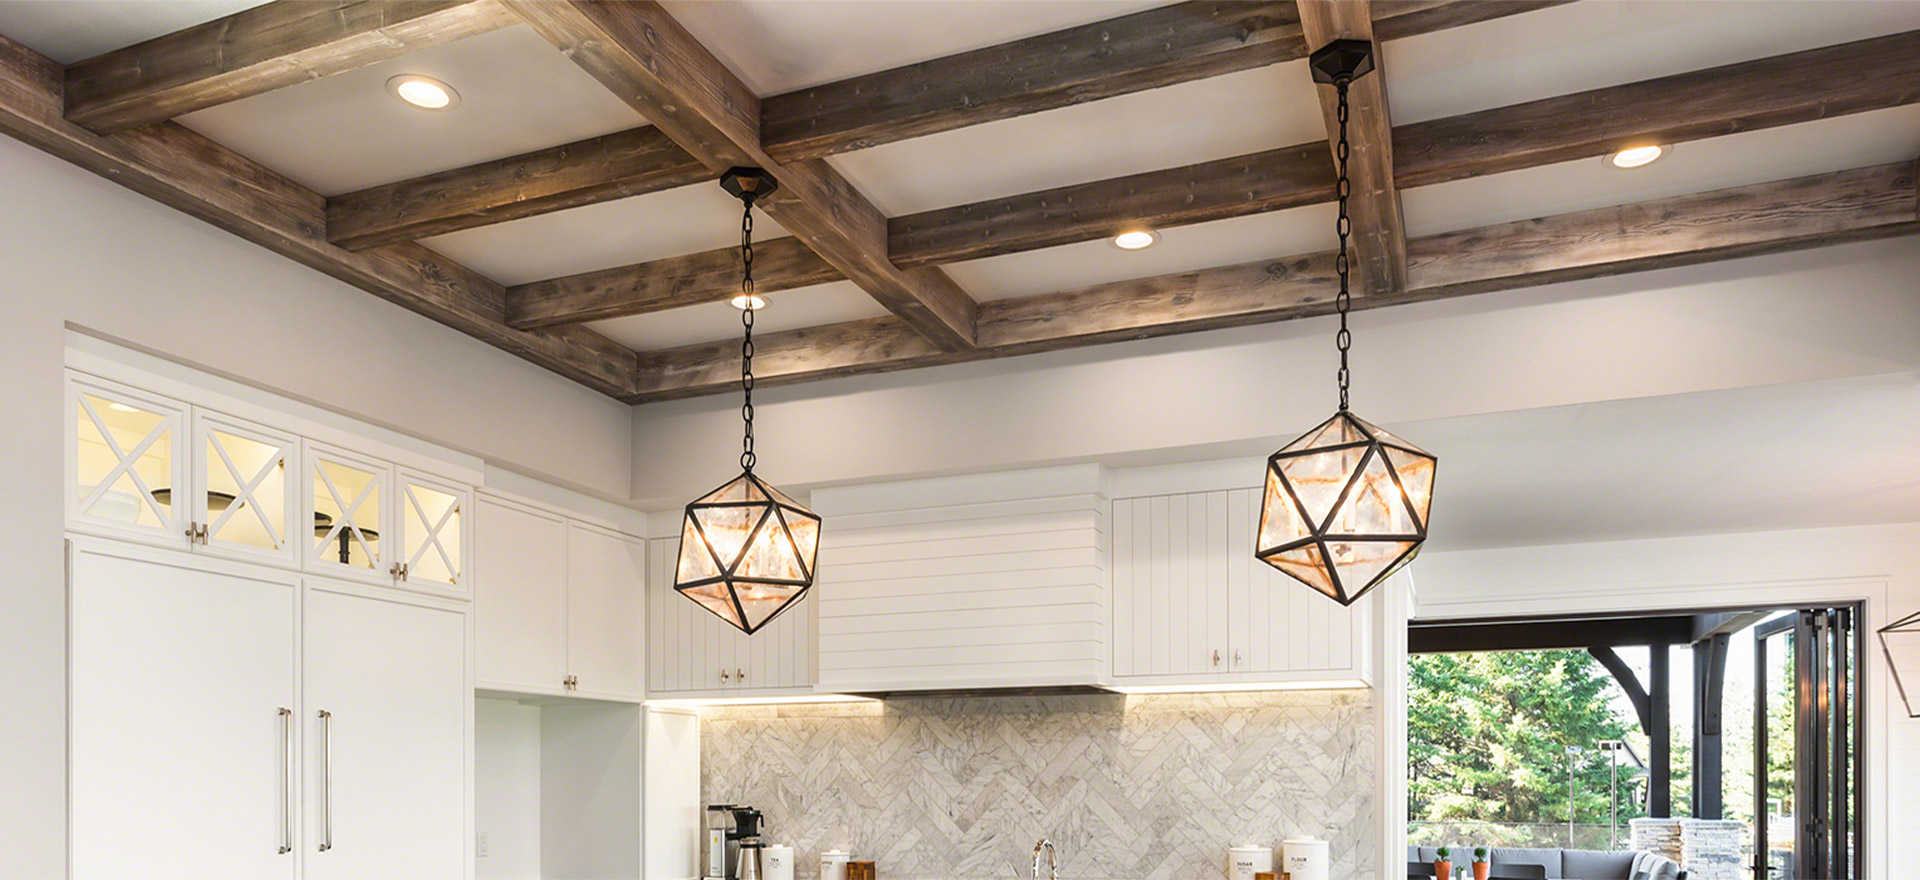 Polyurethane beams and 2 geometric lights in a kitchen ceiling